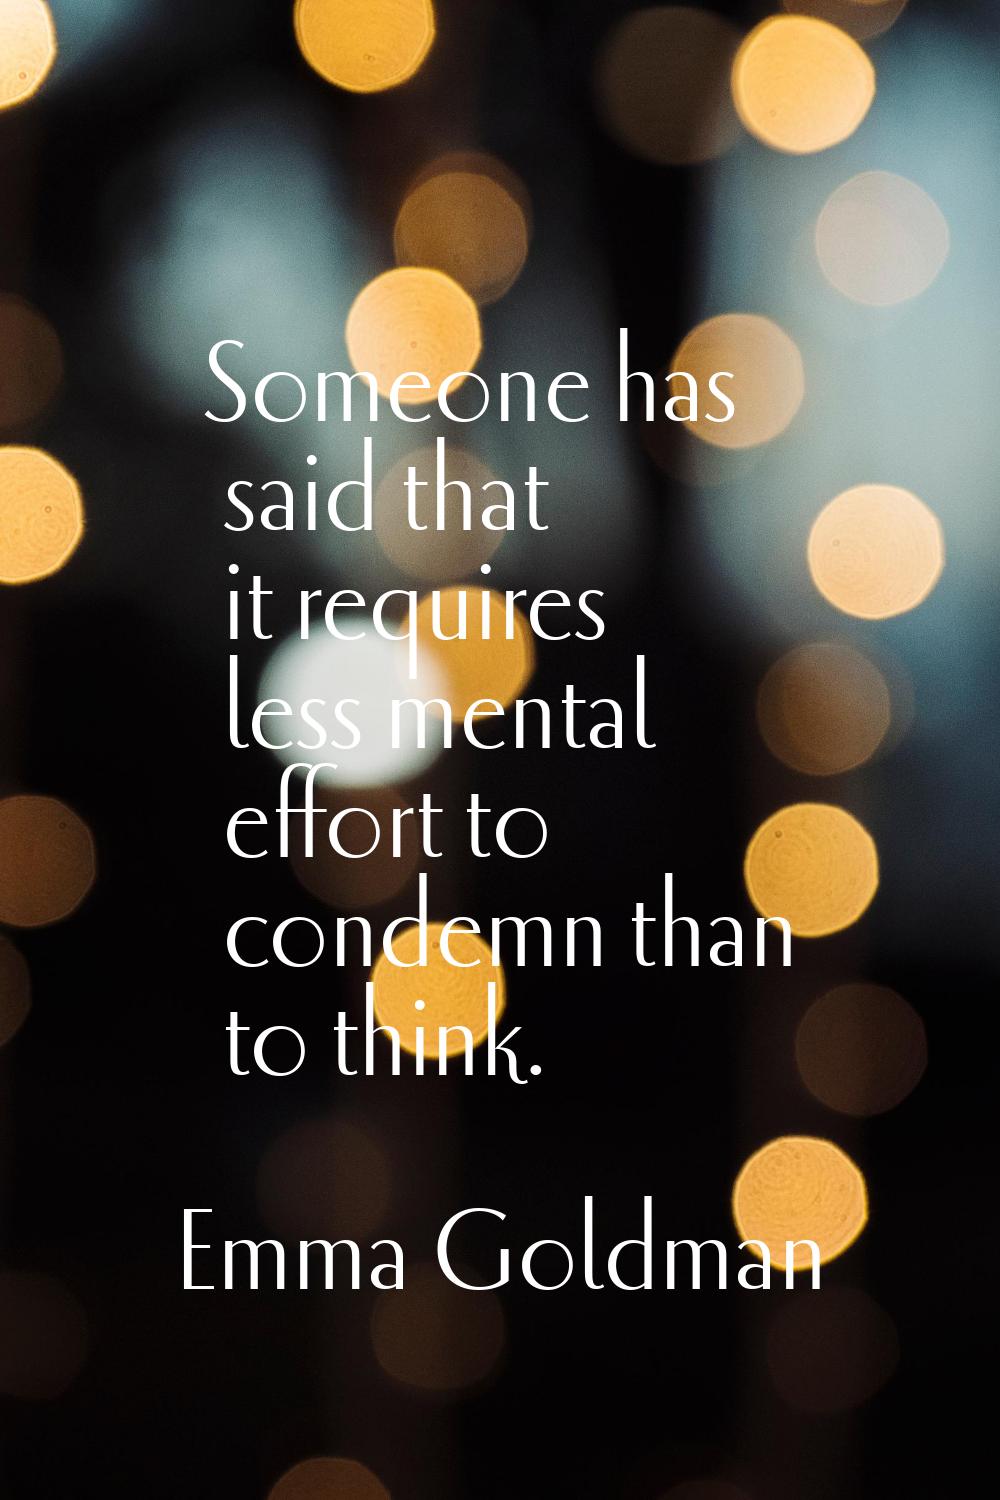 Someone has said that it requires less mental effort to condemn than to think.